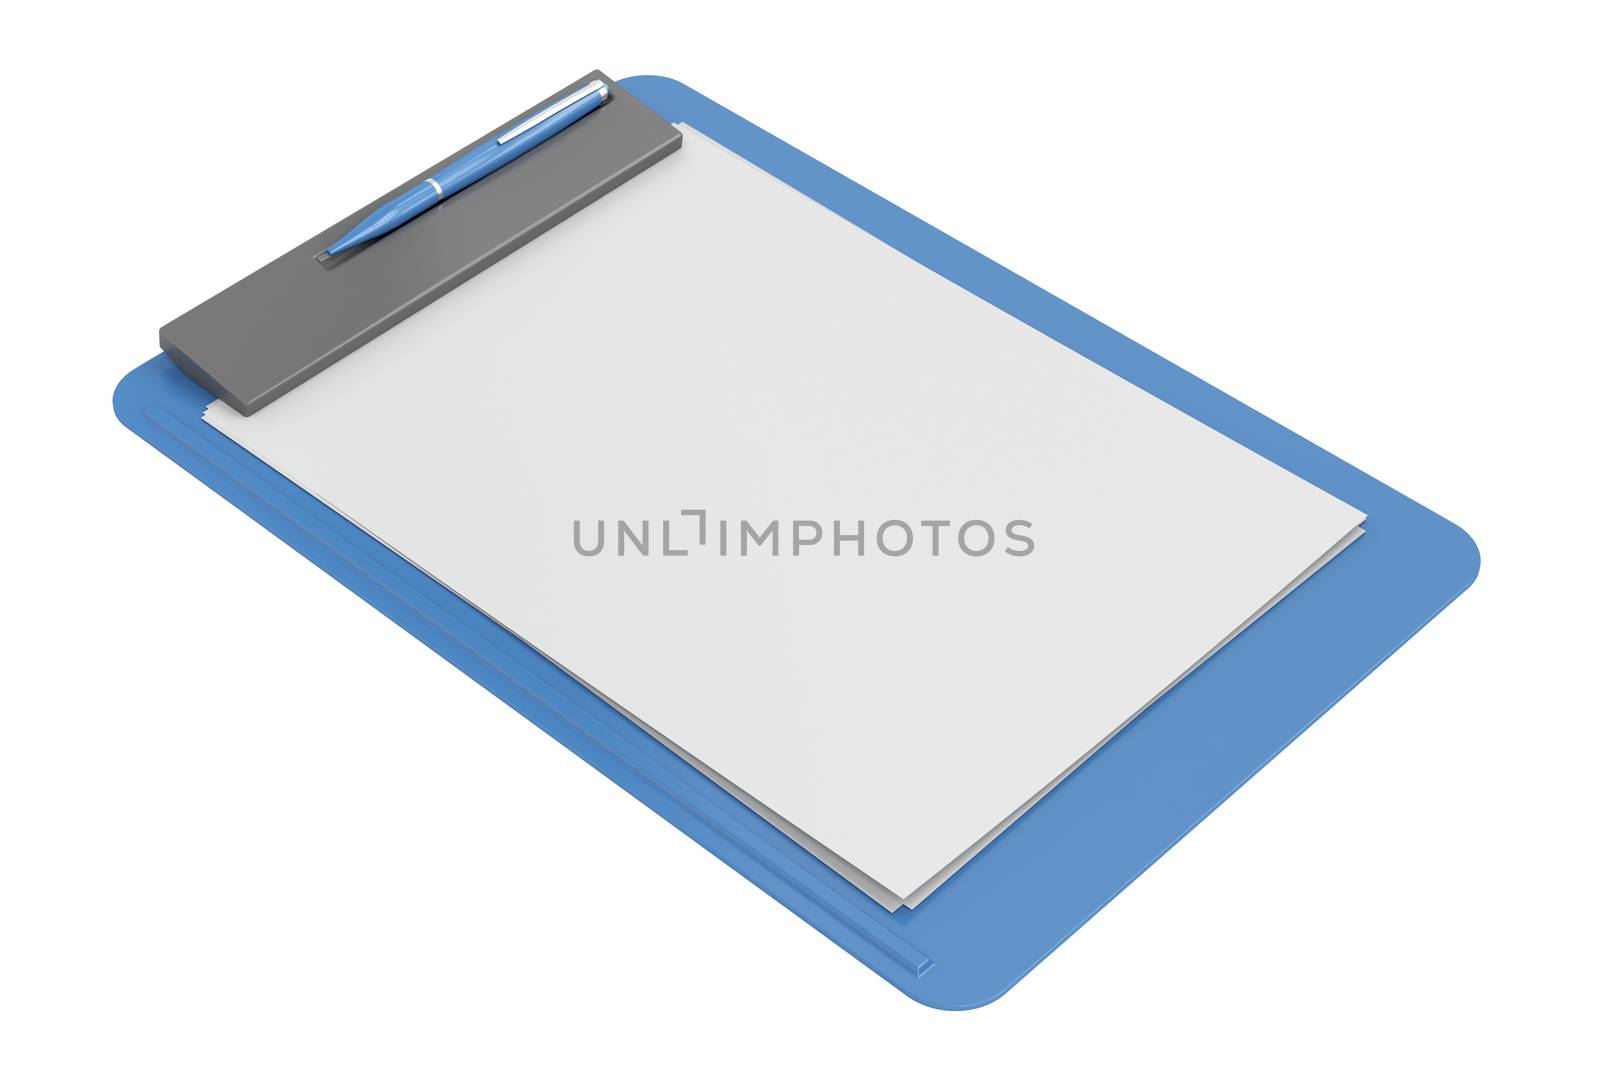 Clipboard by magraphics